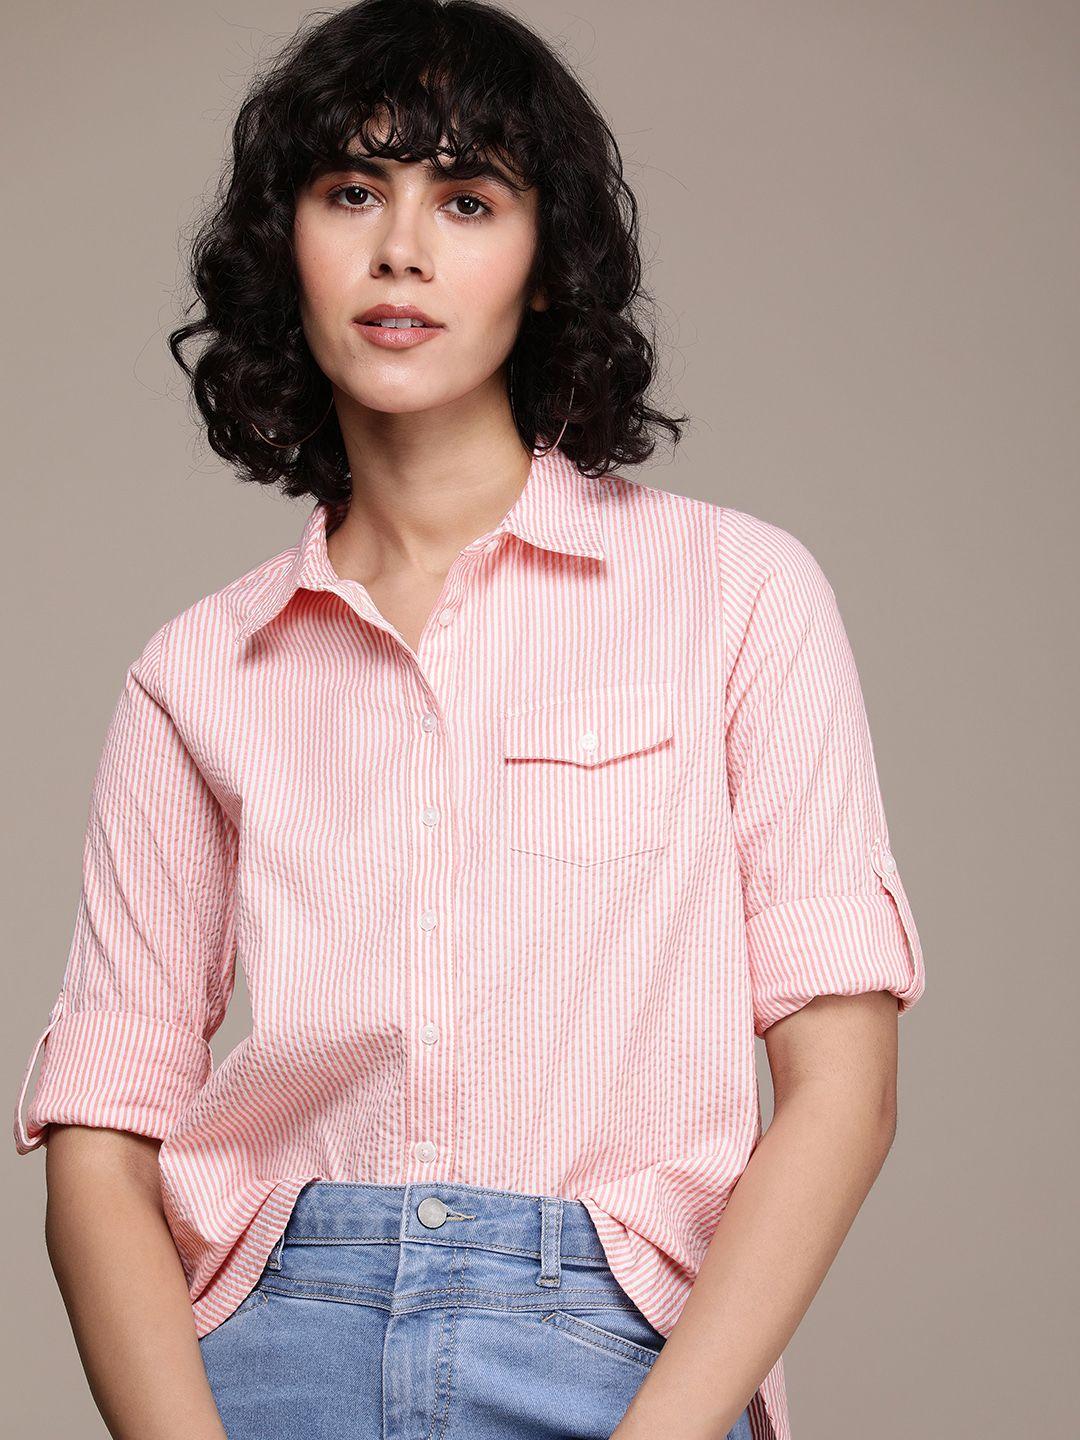 the roadster lifestyle co. women pure cotton oversized striped casual shirt